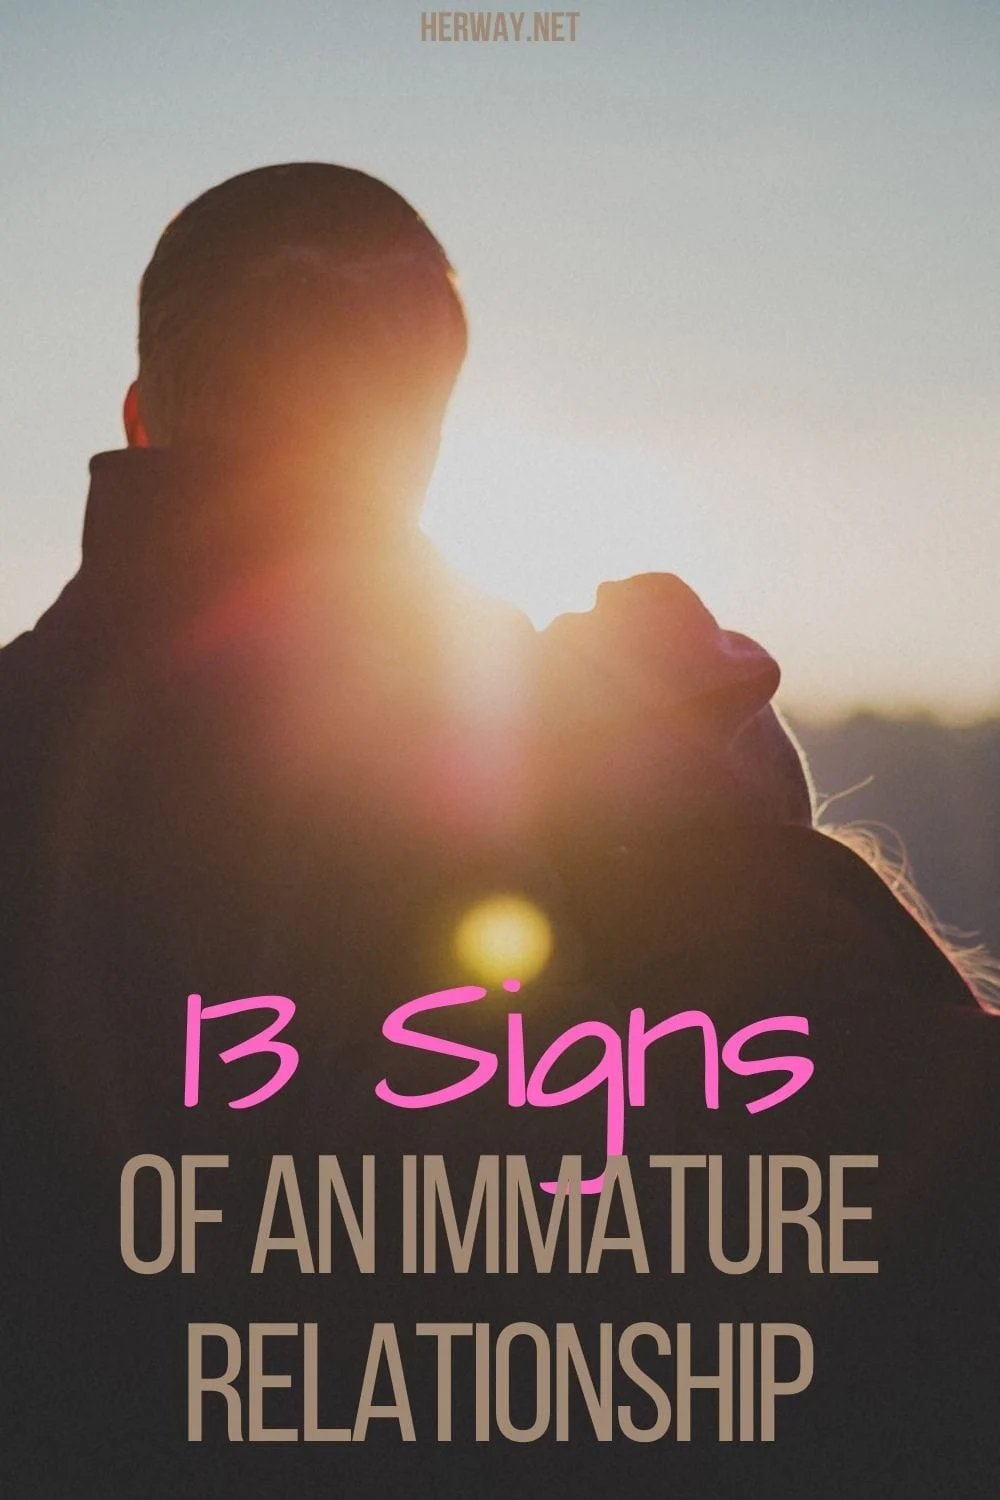 13 Signs Of An Immature Relationship